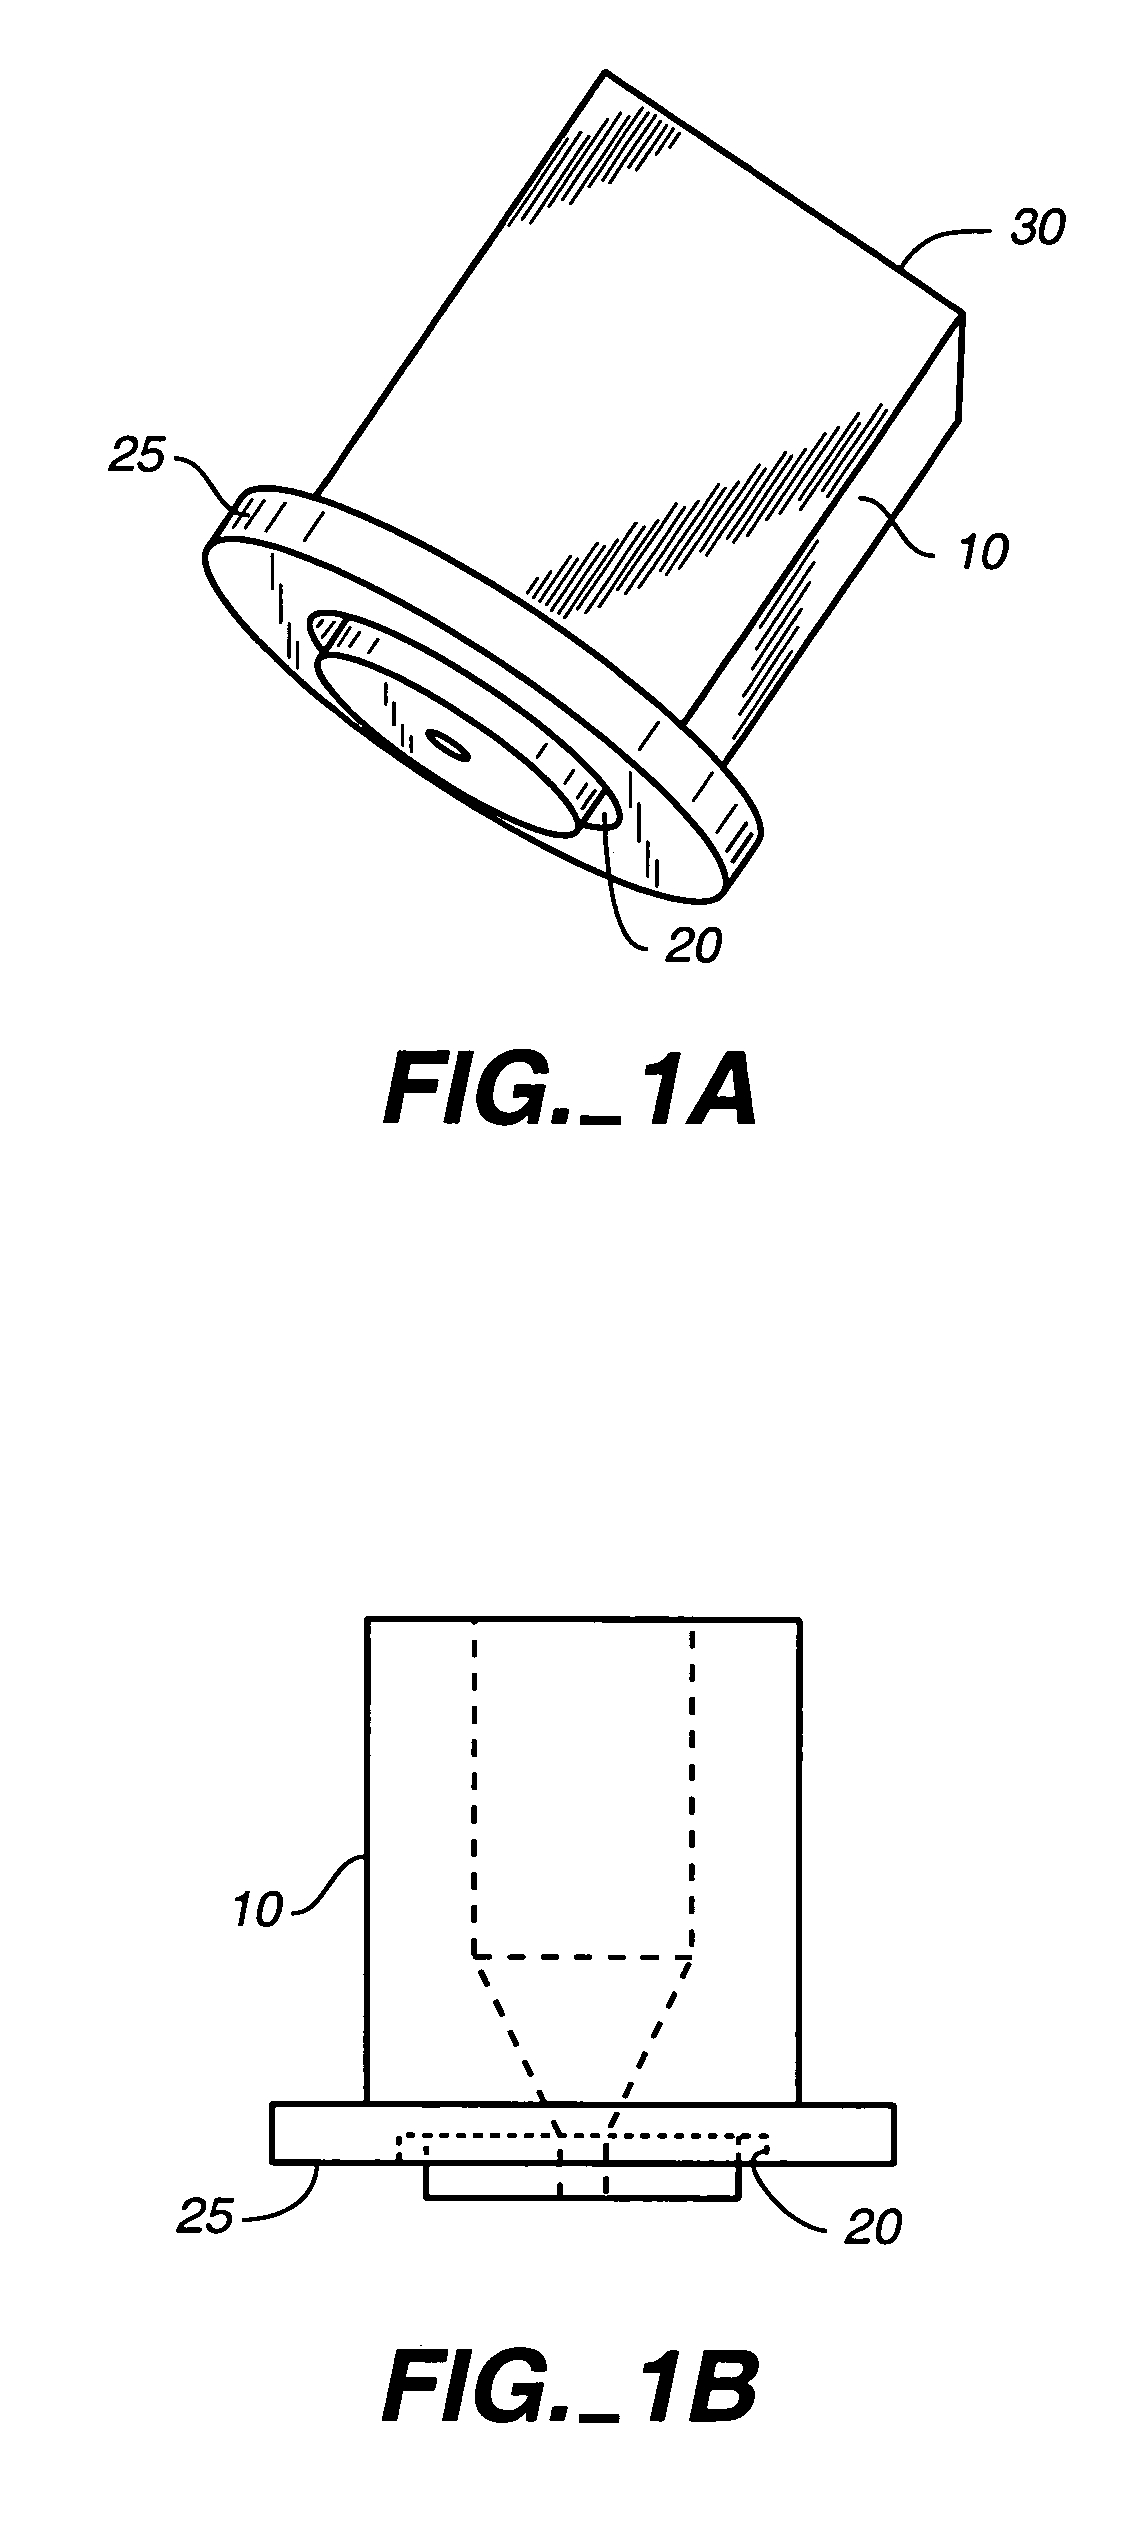 Microfluidic structures and methods for integrating a functional component into a microfluidic device